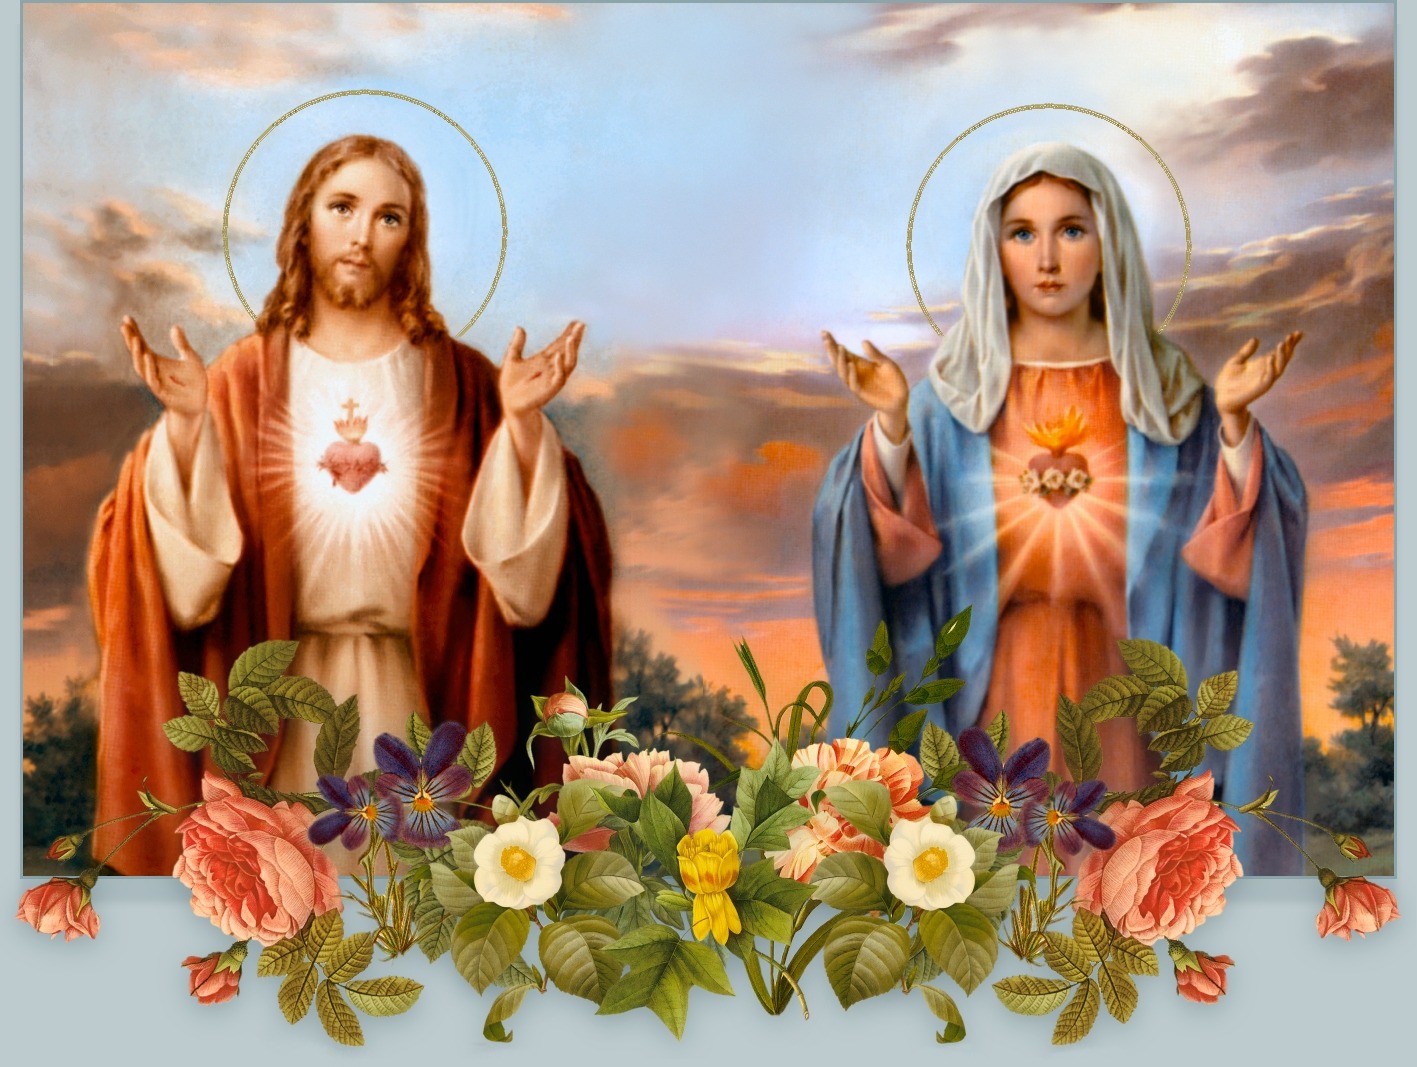 Here are 5 Things That Might be Preventing Jesus and Mother Mary from Blessing You